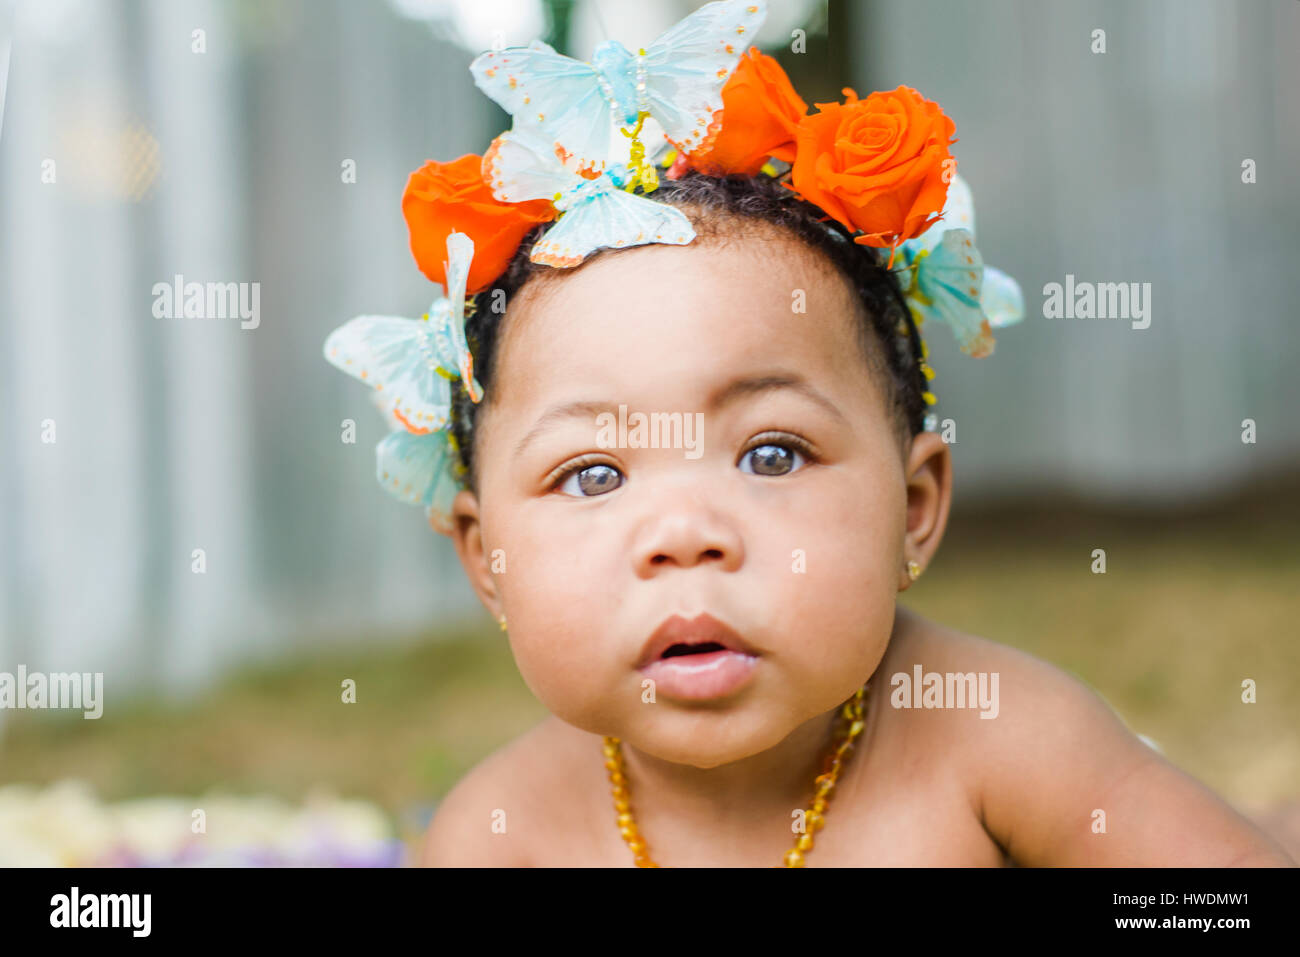 Portrait of baby girl wearing butterflies and flowers in her hair Stock Photo